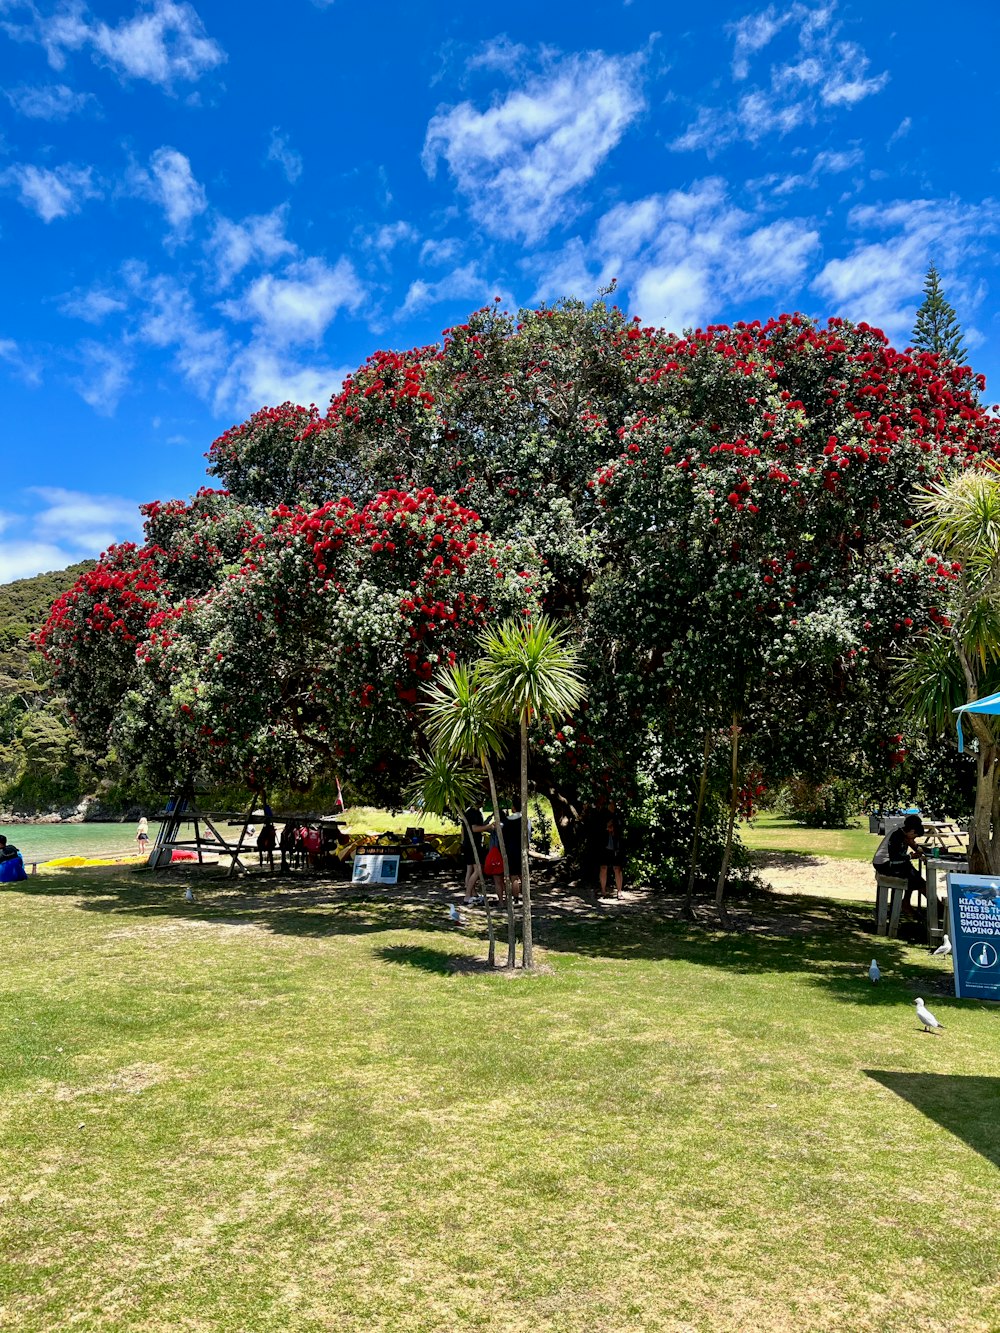 a large tree with red flowers in a park